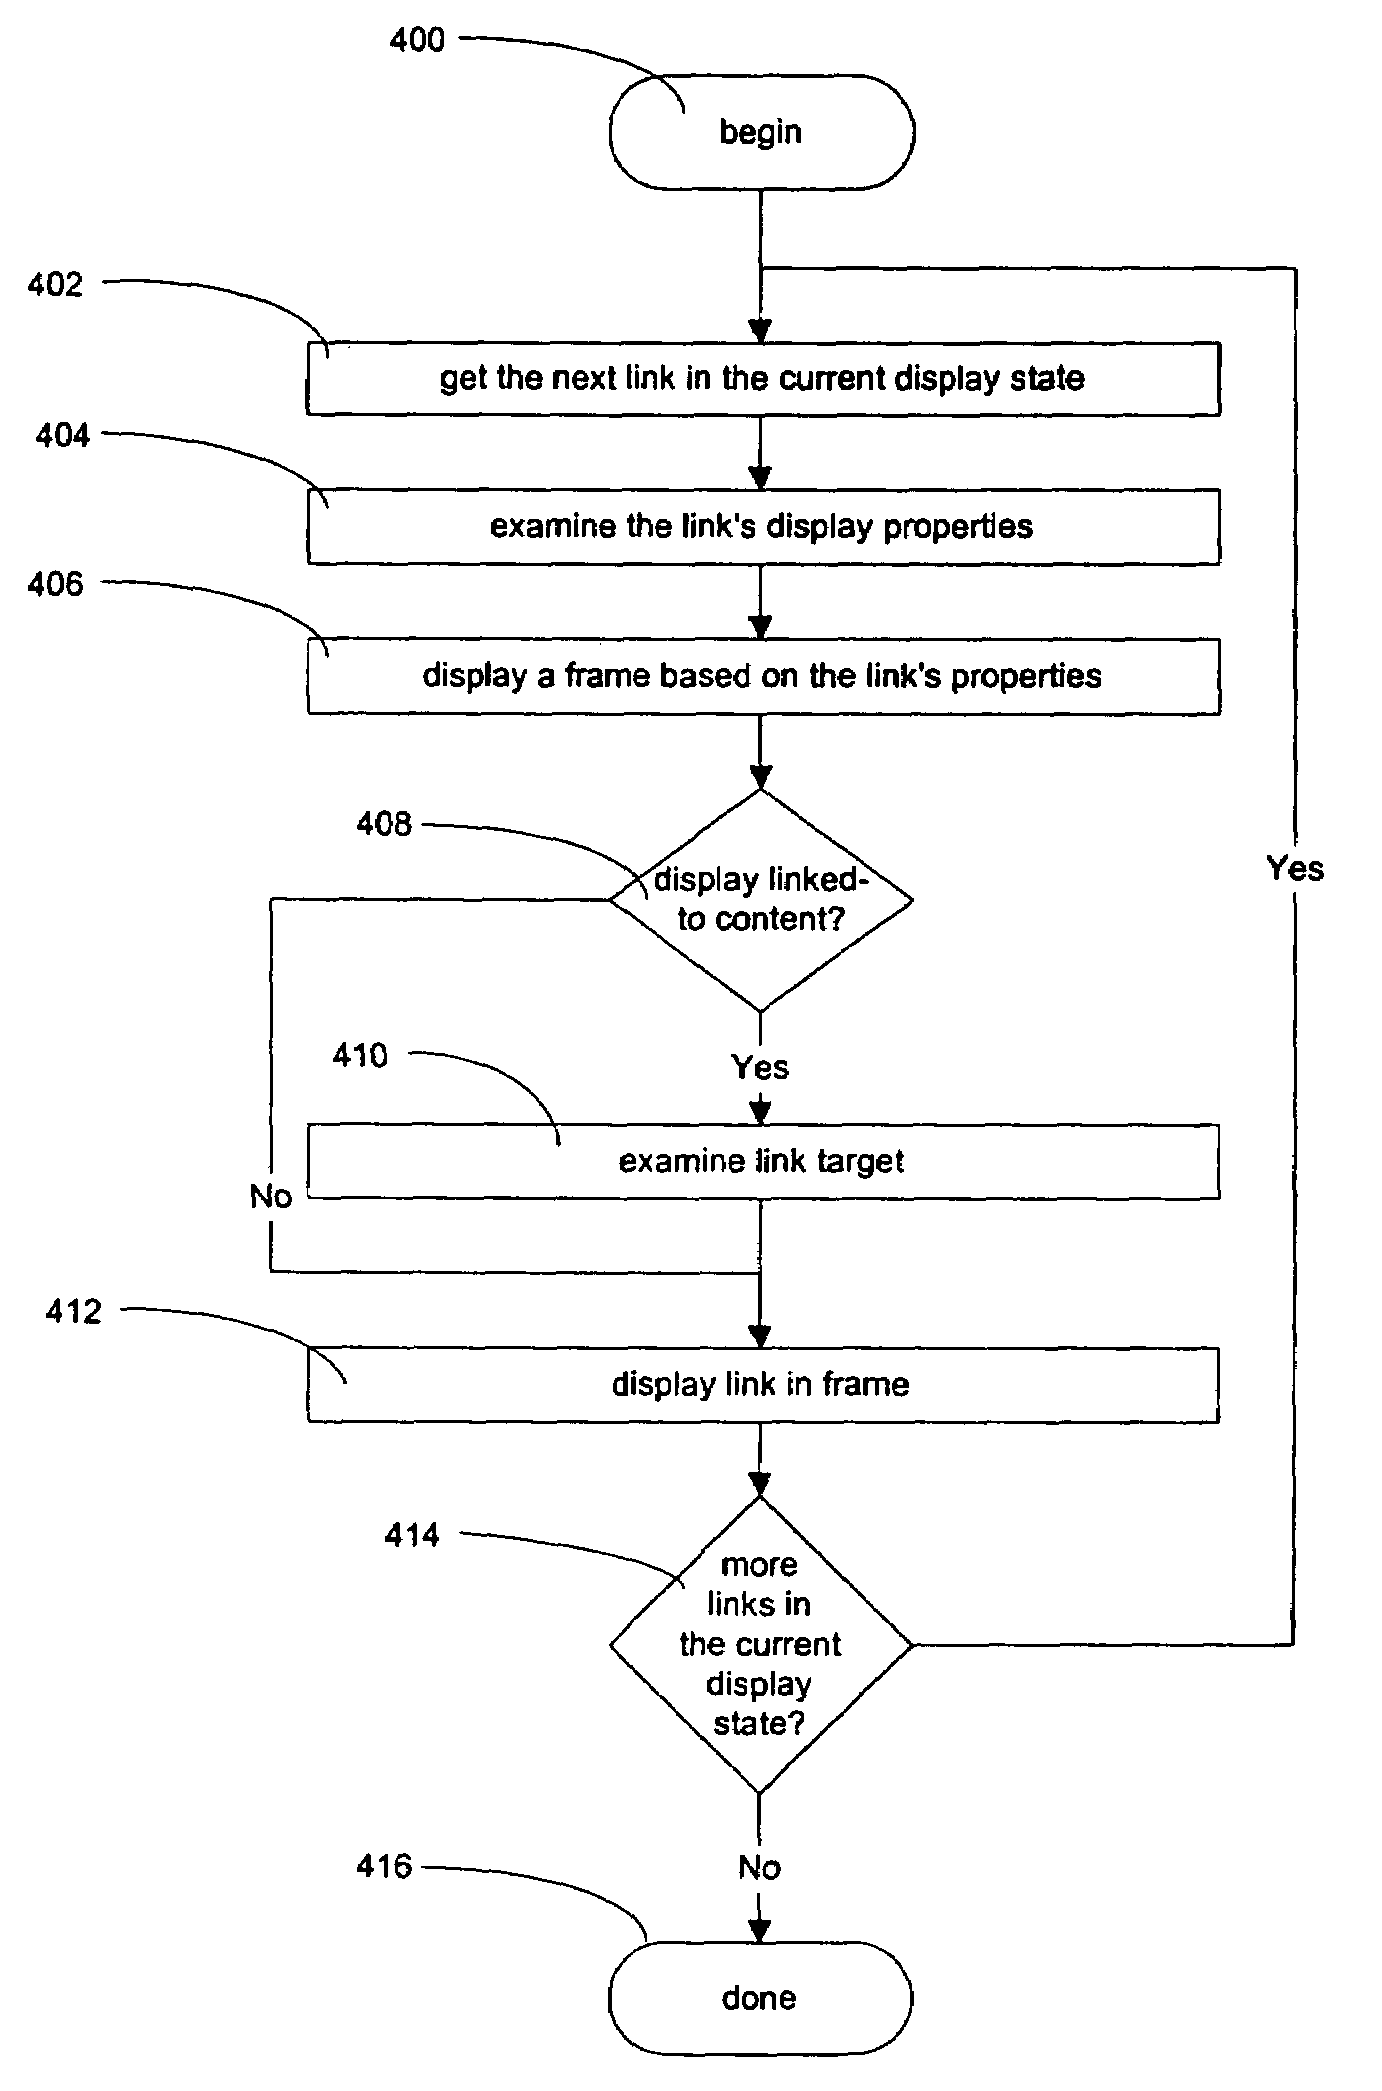 Computer user interface architecture that saves a user's non-linear navigation history and intelligently maintains that history